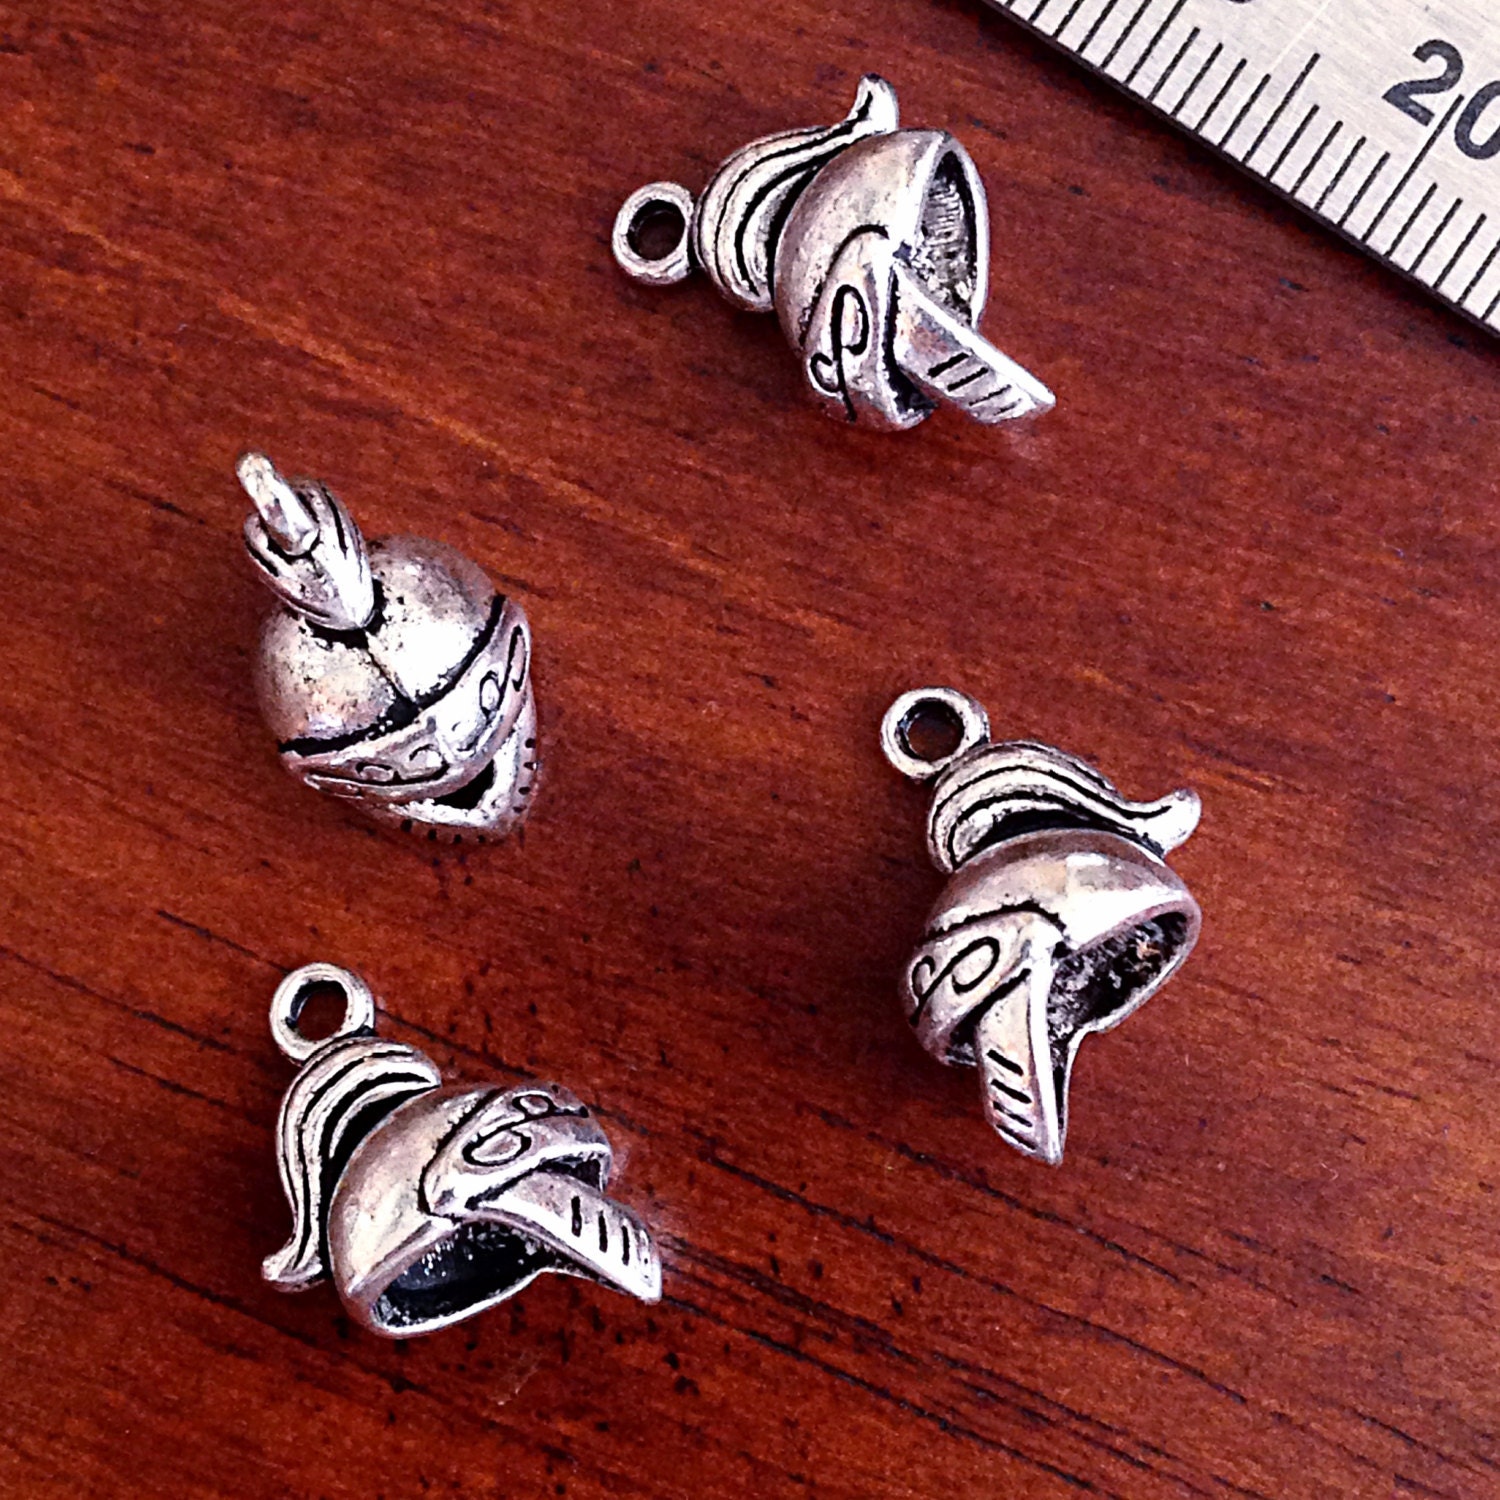 12pcs/bag 19 X 18mm Cat Charms For Jewelry Making Jewelry Craft